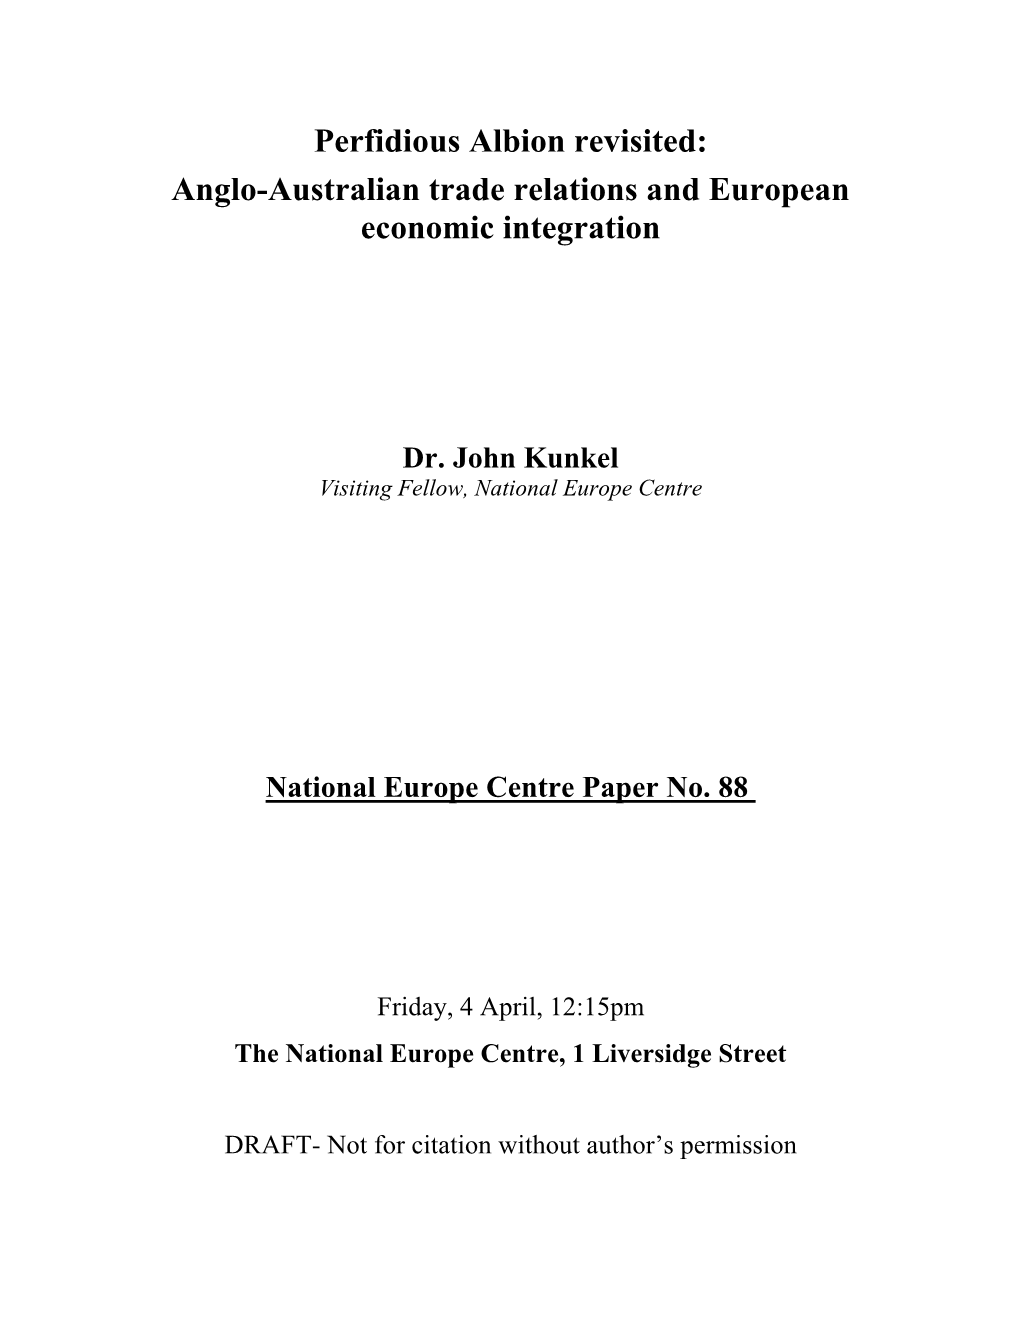 Anglo-Australian Trade Relations and European Economic Integration